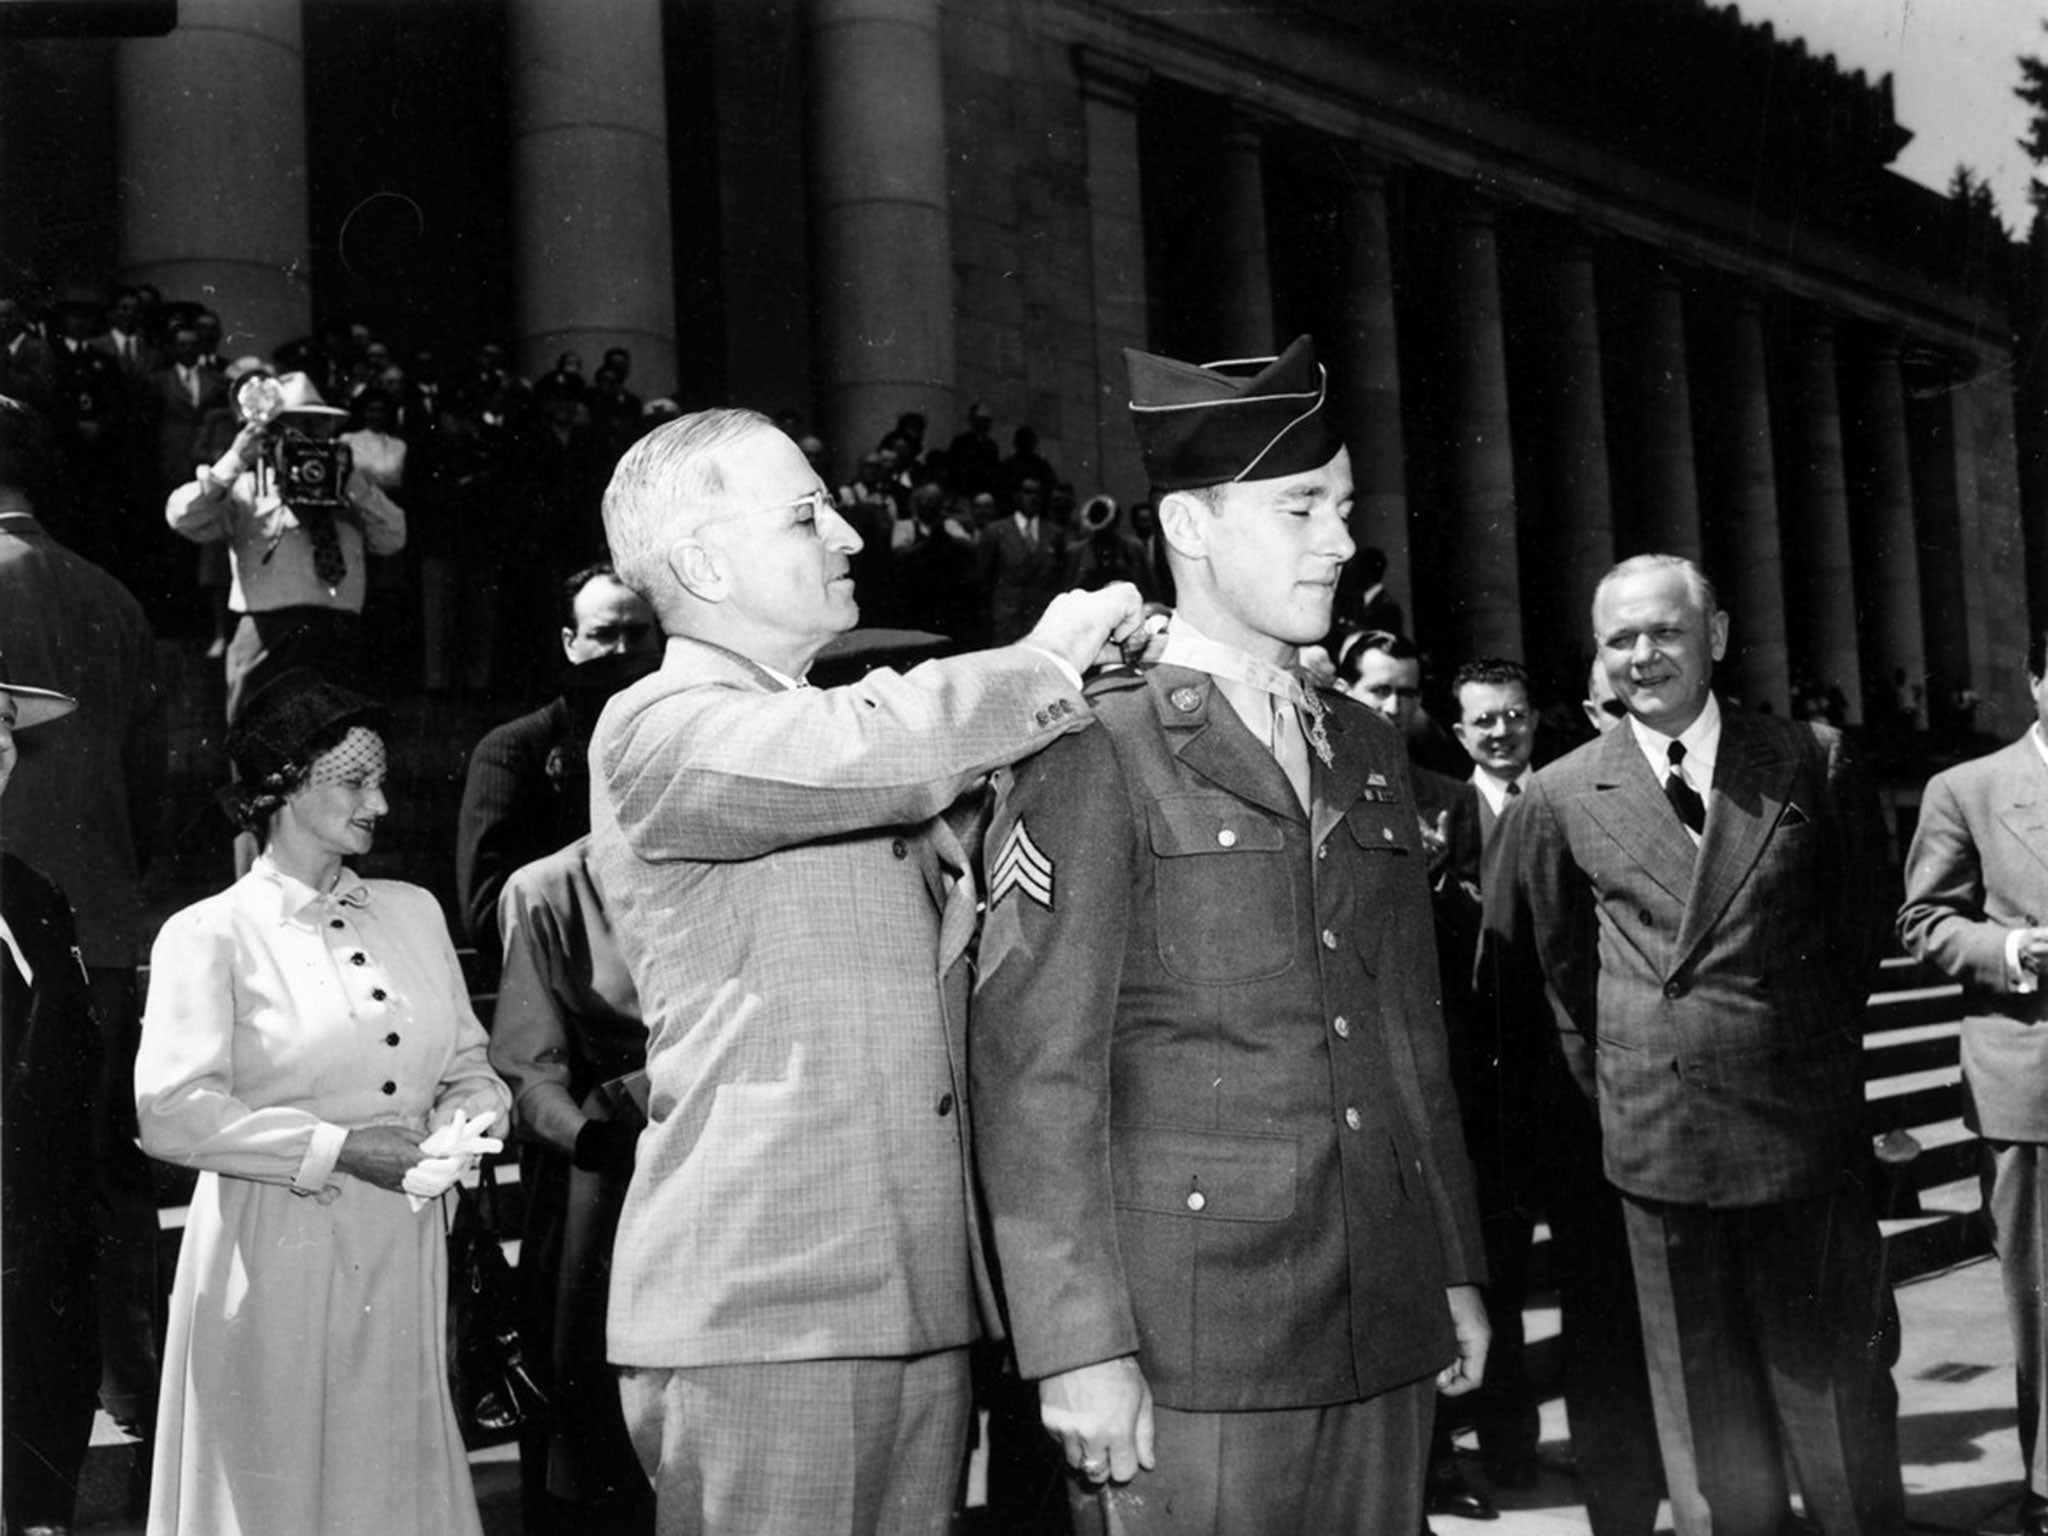 Hawk receives the Medal of Honor from President Truman